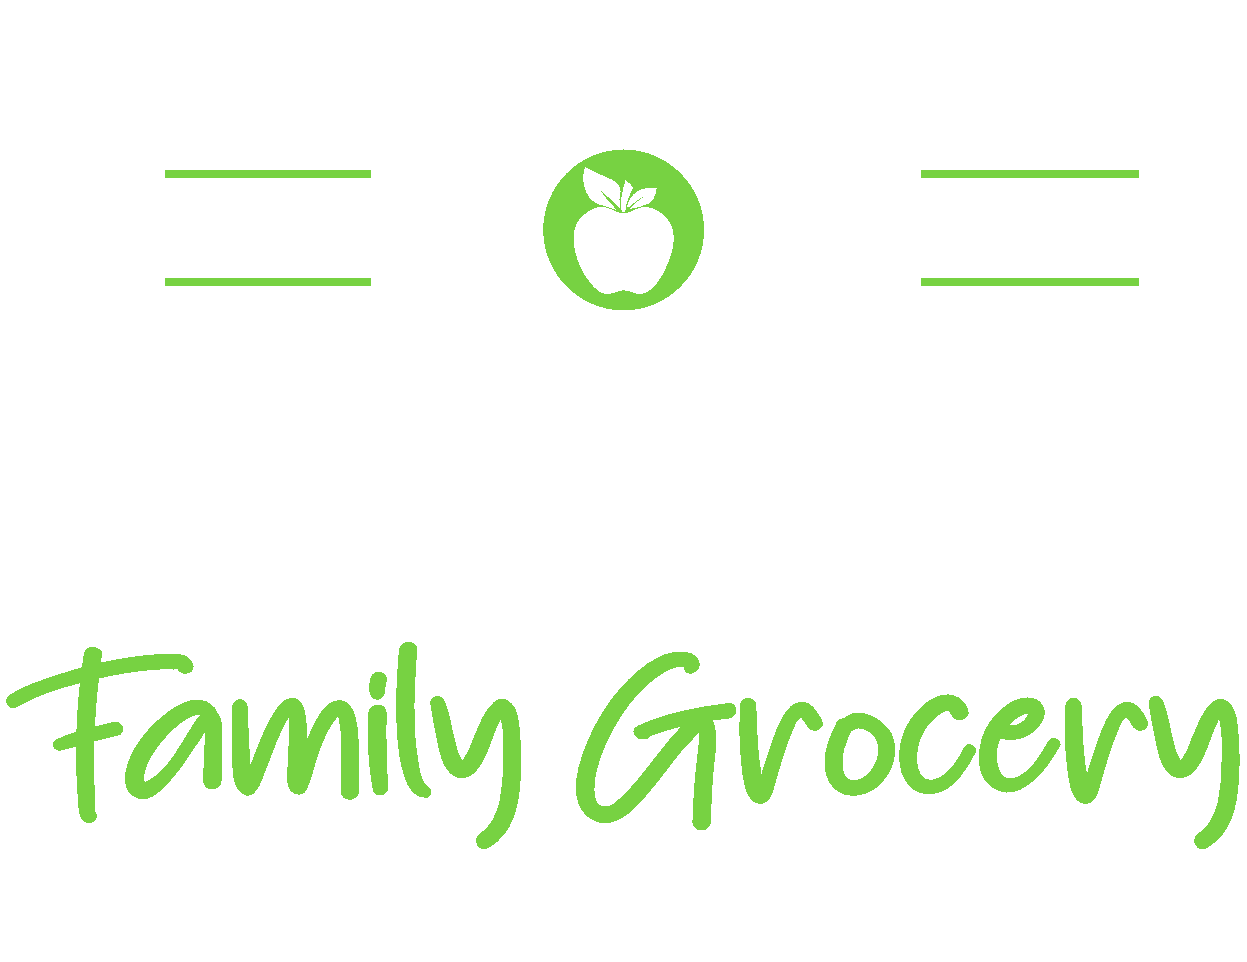 A theme footer logo of Phillips Family Grocery